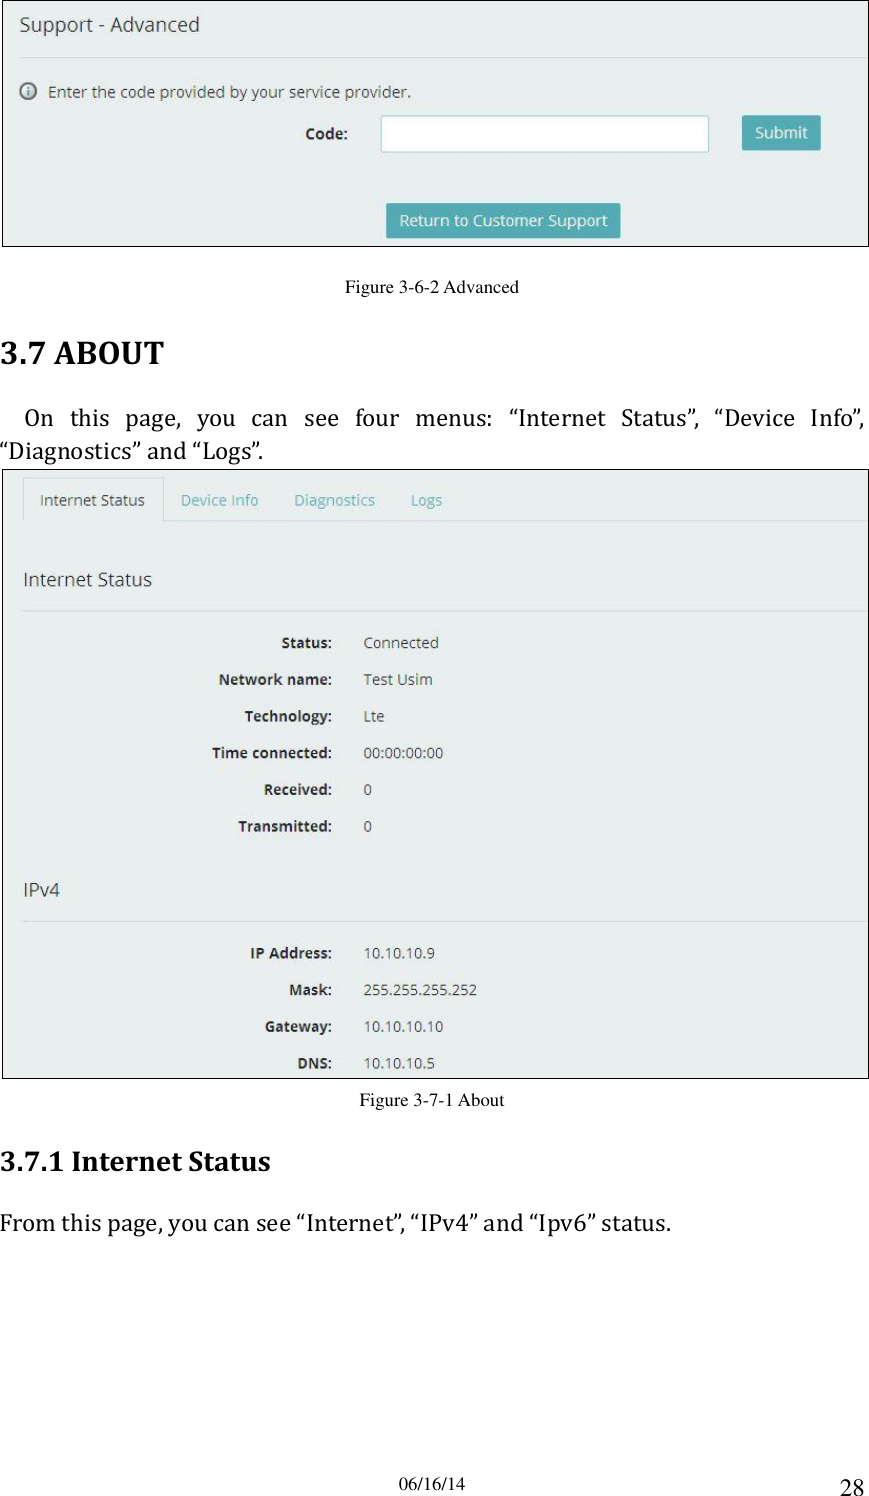 06/16/14 28  Figure 3-6-2 Advanced 3.7 ABOUT On  this  page,  you  can  see  four  menus:  “Internet  Status”,  “Device  Info”, “Diagnostics” and “Logs”.  Figure 3-7-1 About 3.7.1 Internet Status From this page, you can see “Internet”, “IPv4” and “Ipv6” status. 